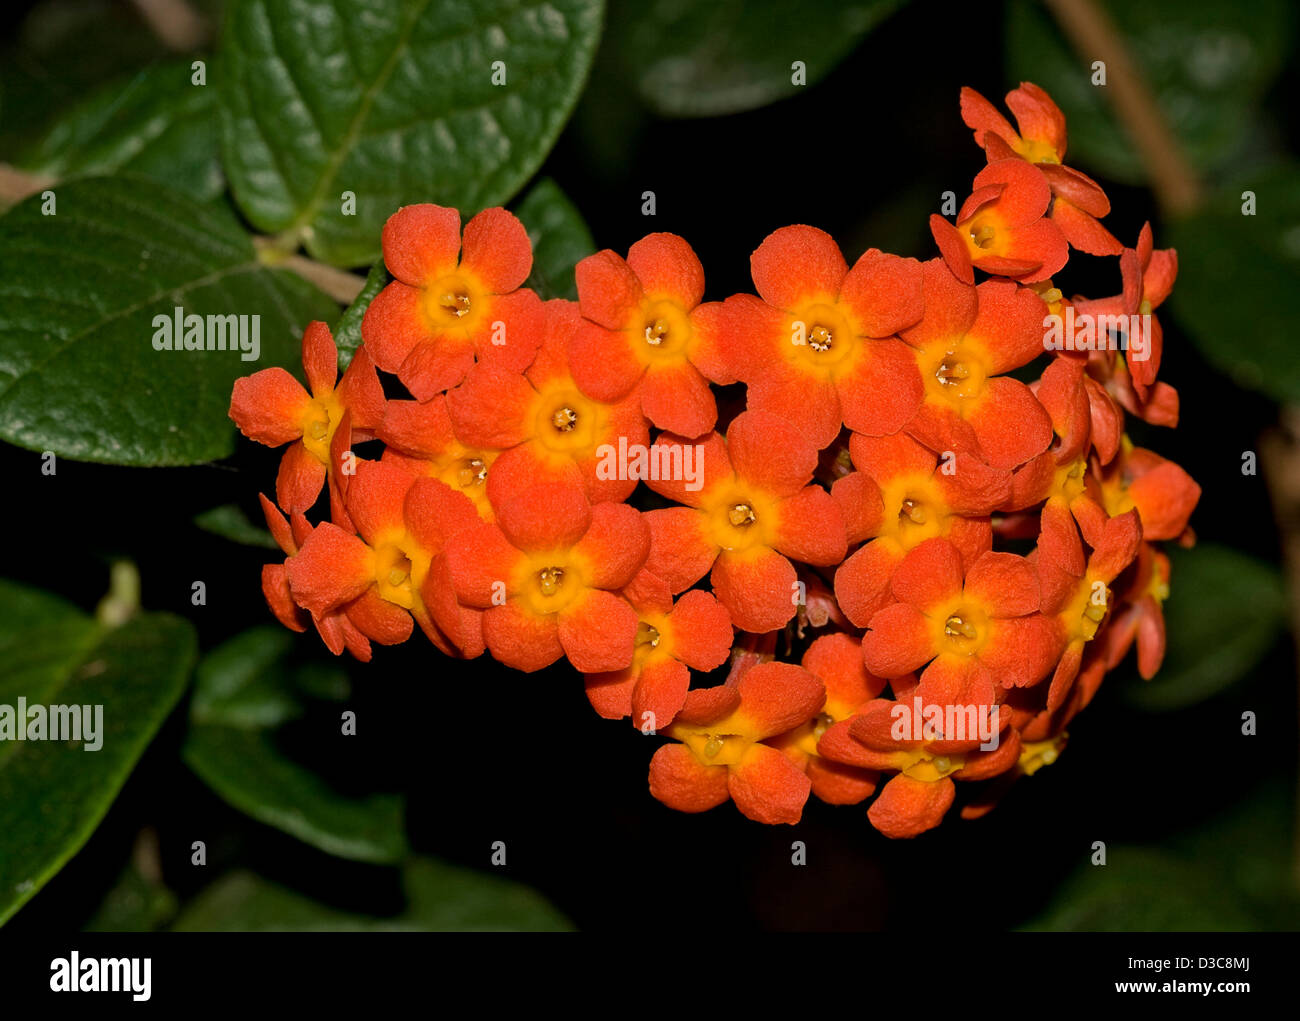 Cluster Of Bright Orange Flowers Of Rondeletia Odorata With Dark Green Leaves In The Background Stock Photo Alamy